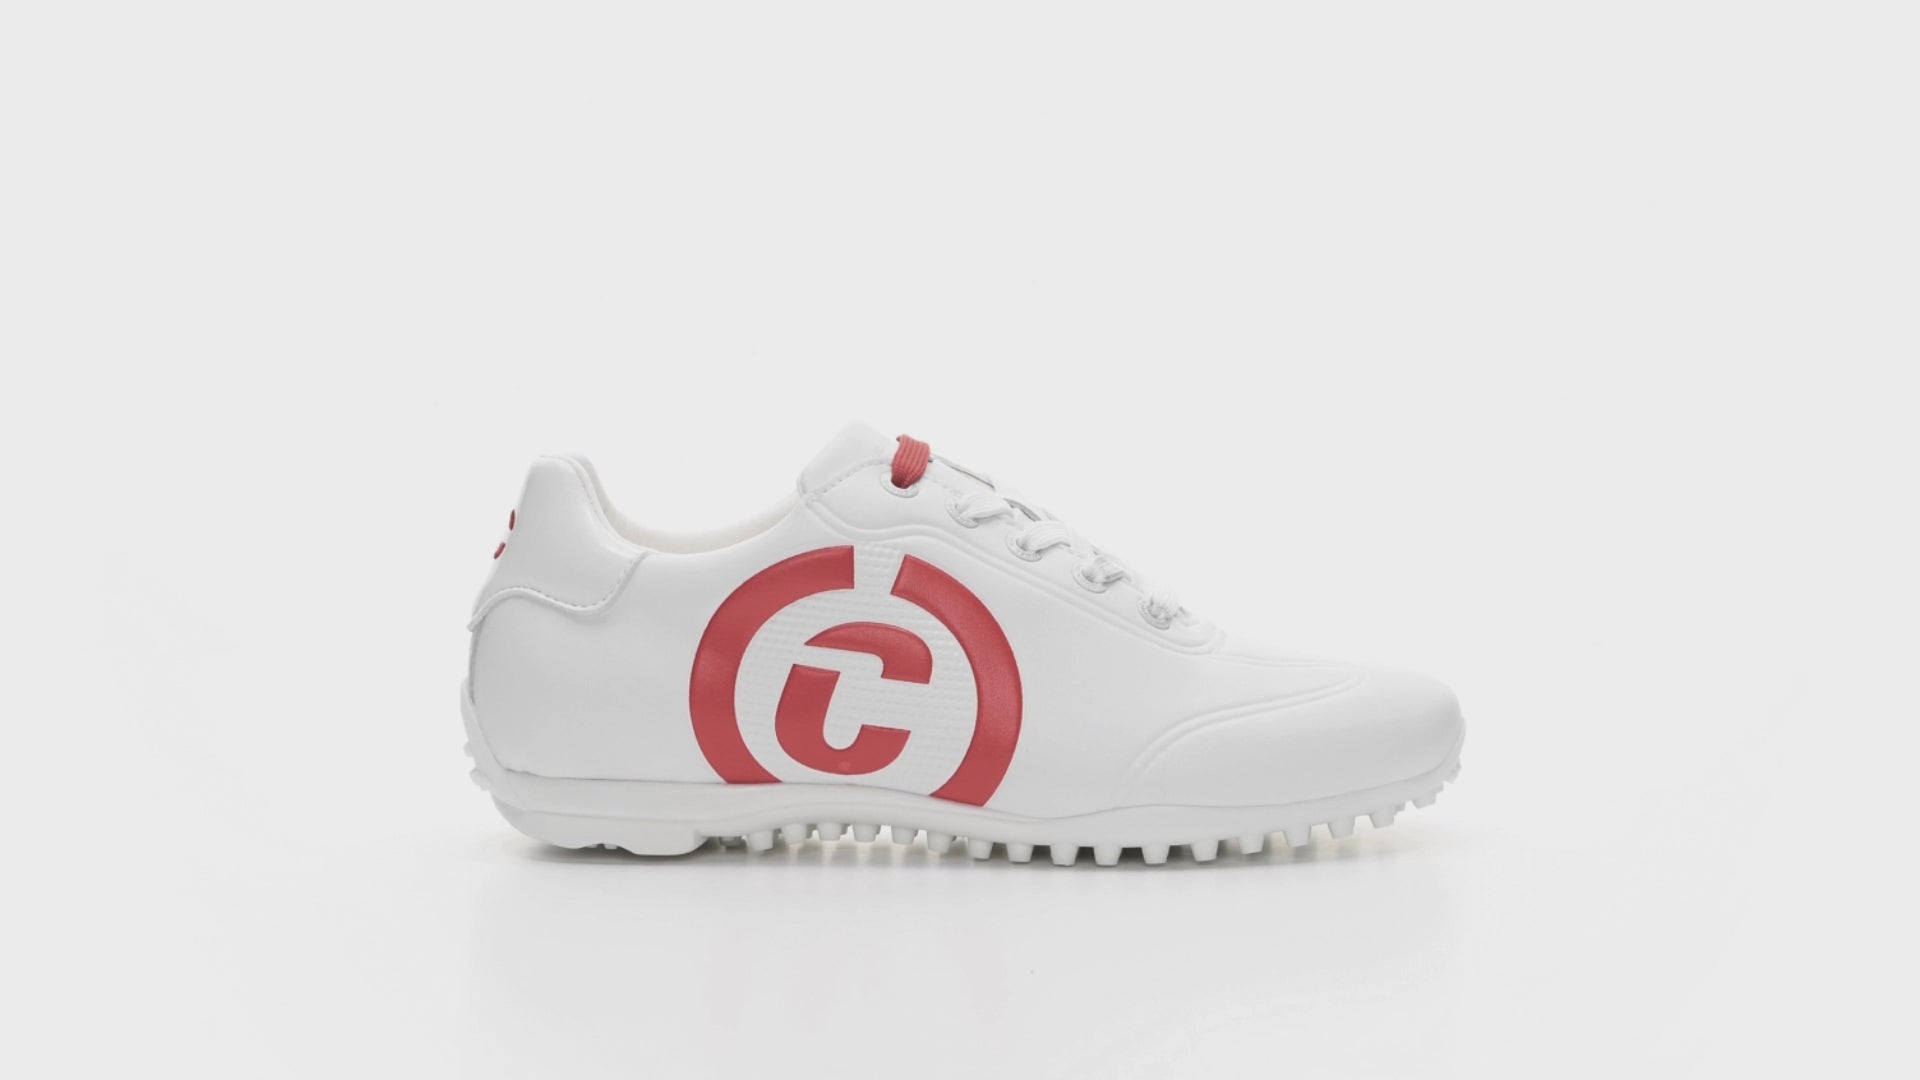 Queenscup White/Red - Women's Golf Shoe